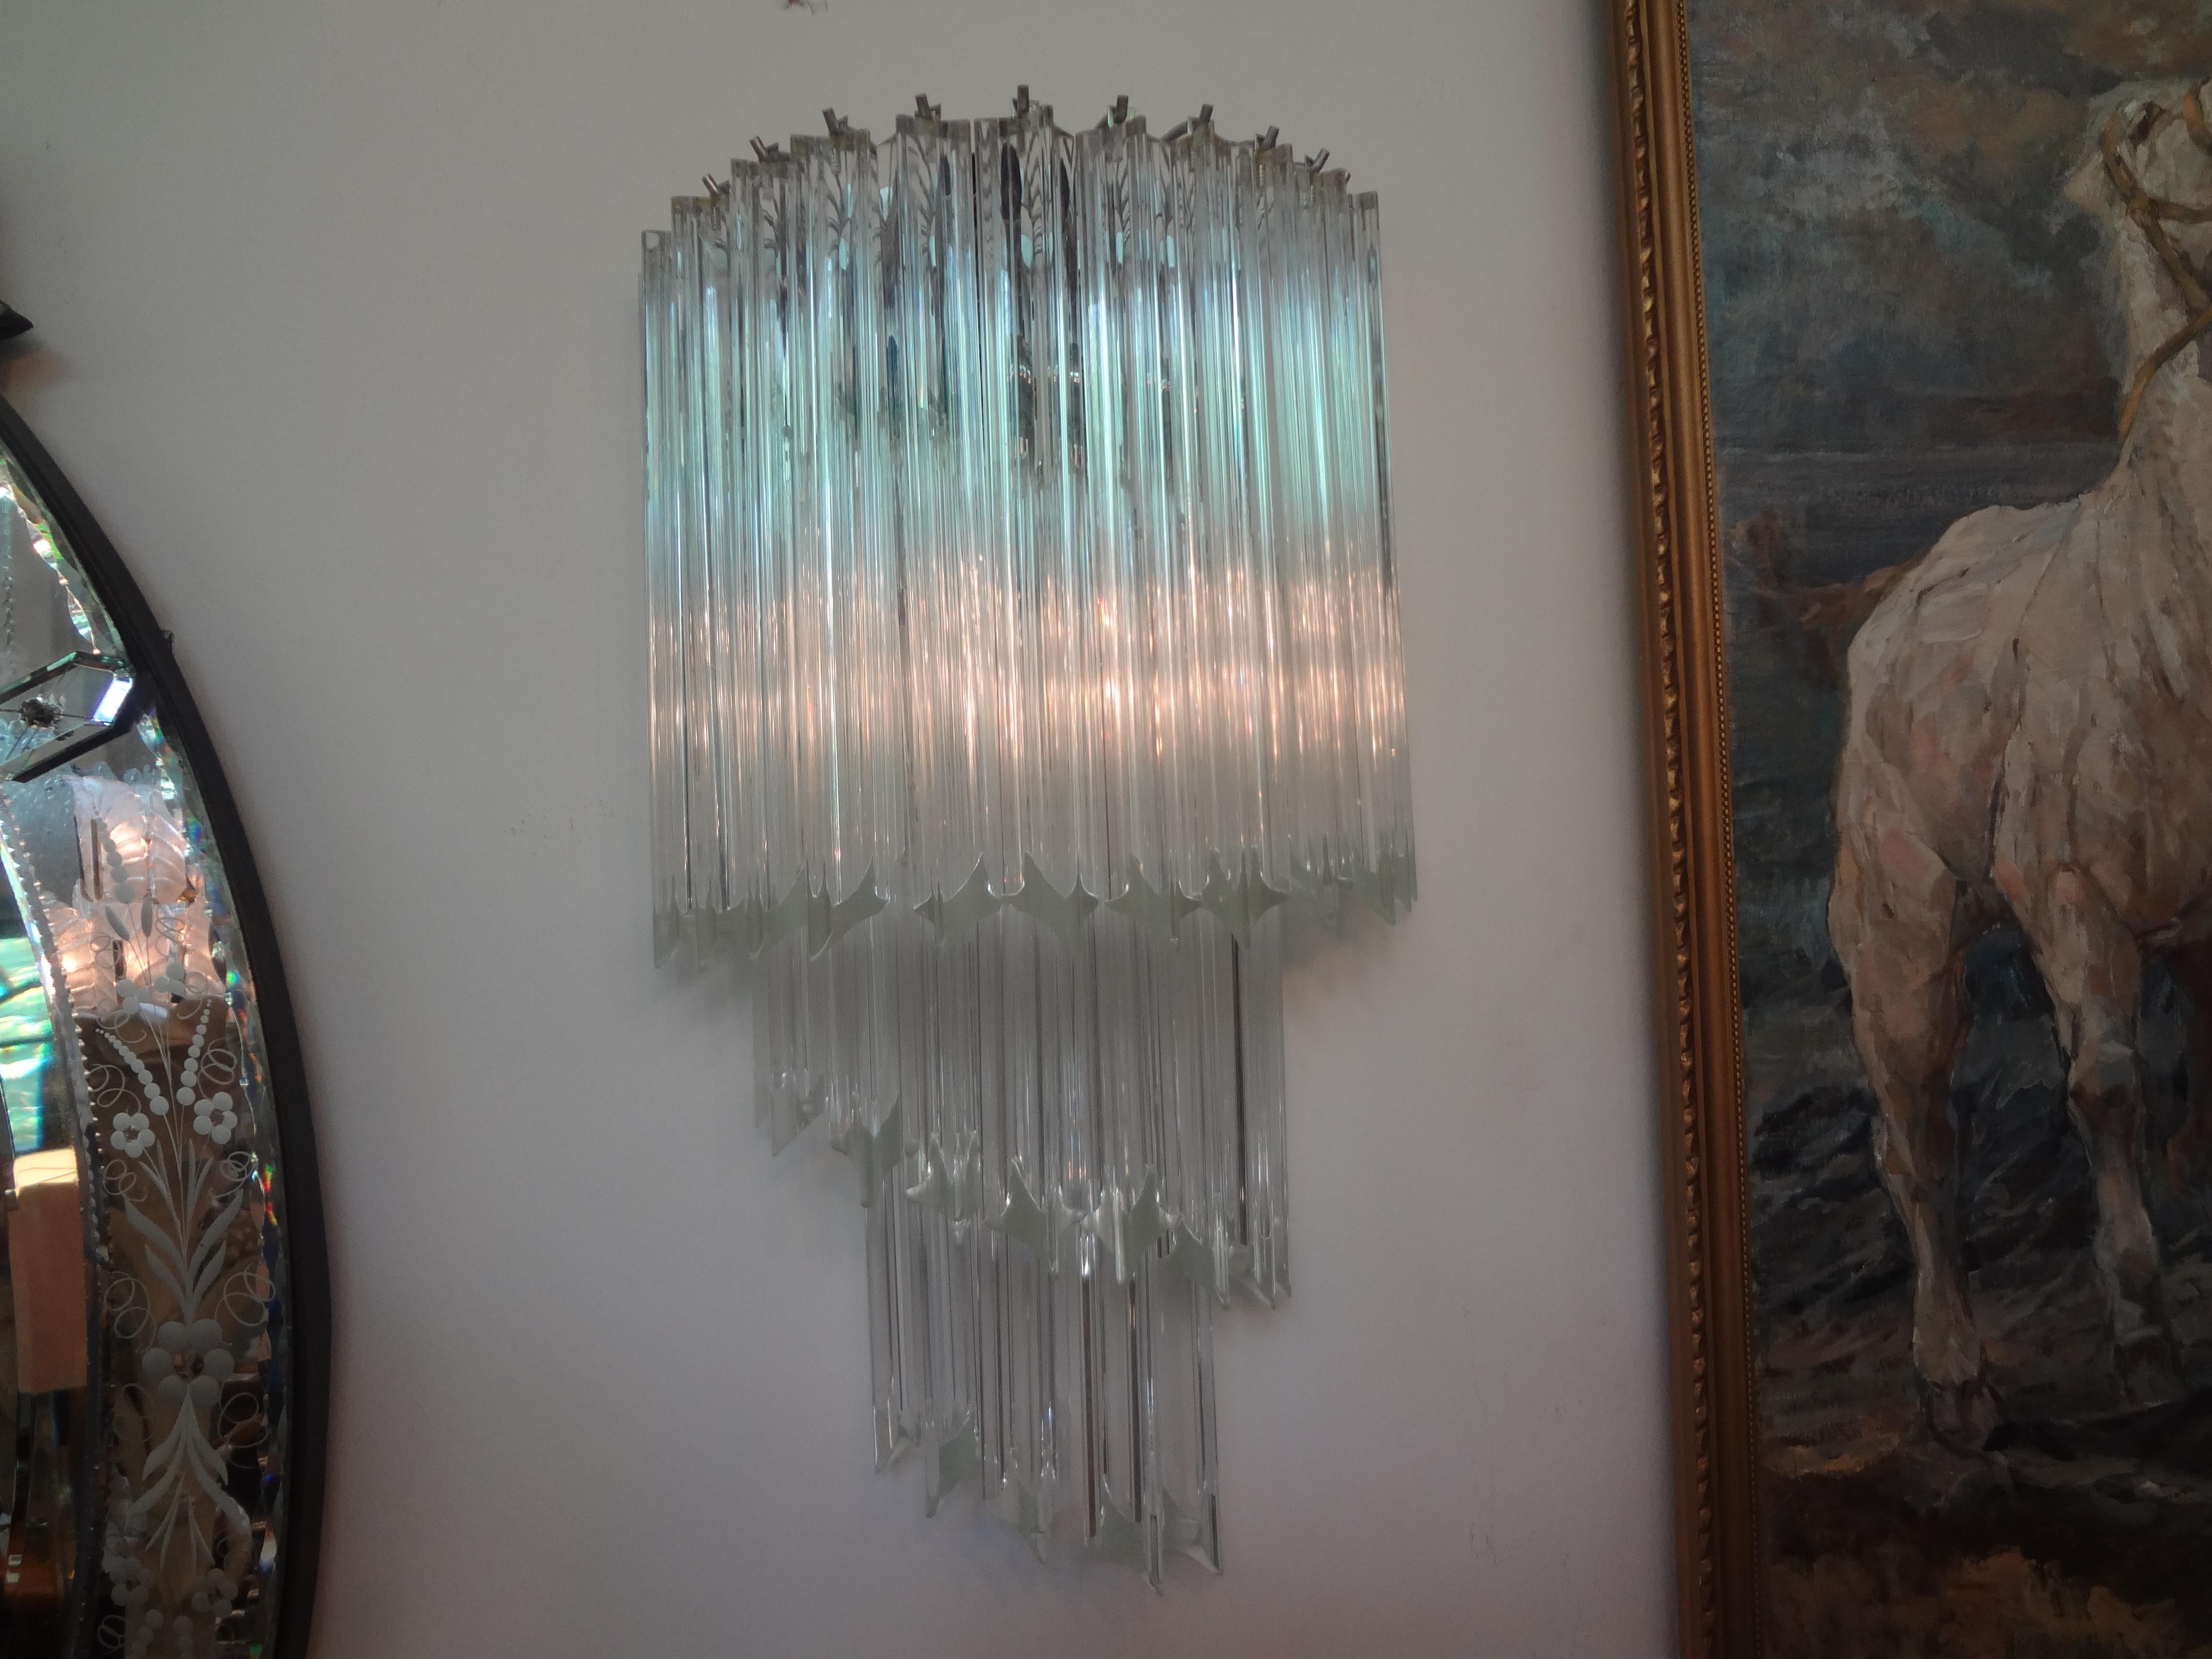 Large Pair of Venini Attributed Murano Glass Spiral Sconces.
Stunning large pair of Venini attributed Murano clear glass prism sconces on chrome structures. This gorgeous pair of Mid-Century Modern Murano sconces are most likely by Toni Zuccheri for